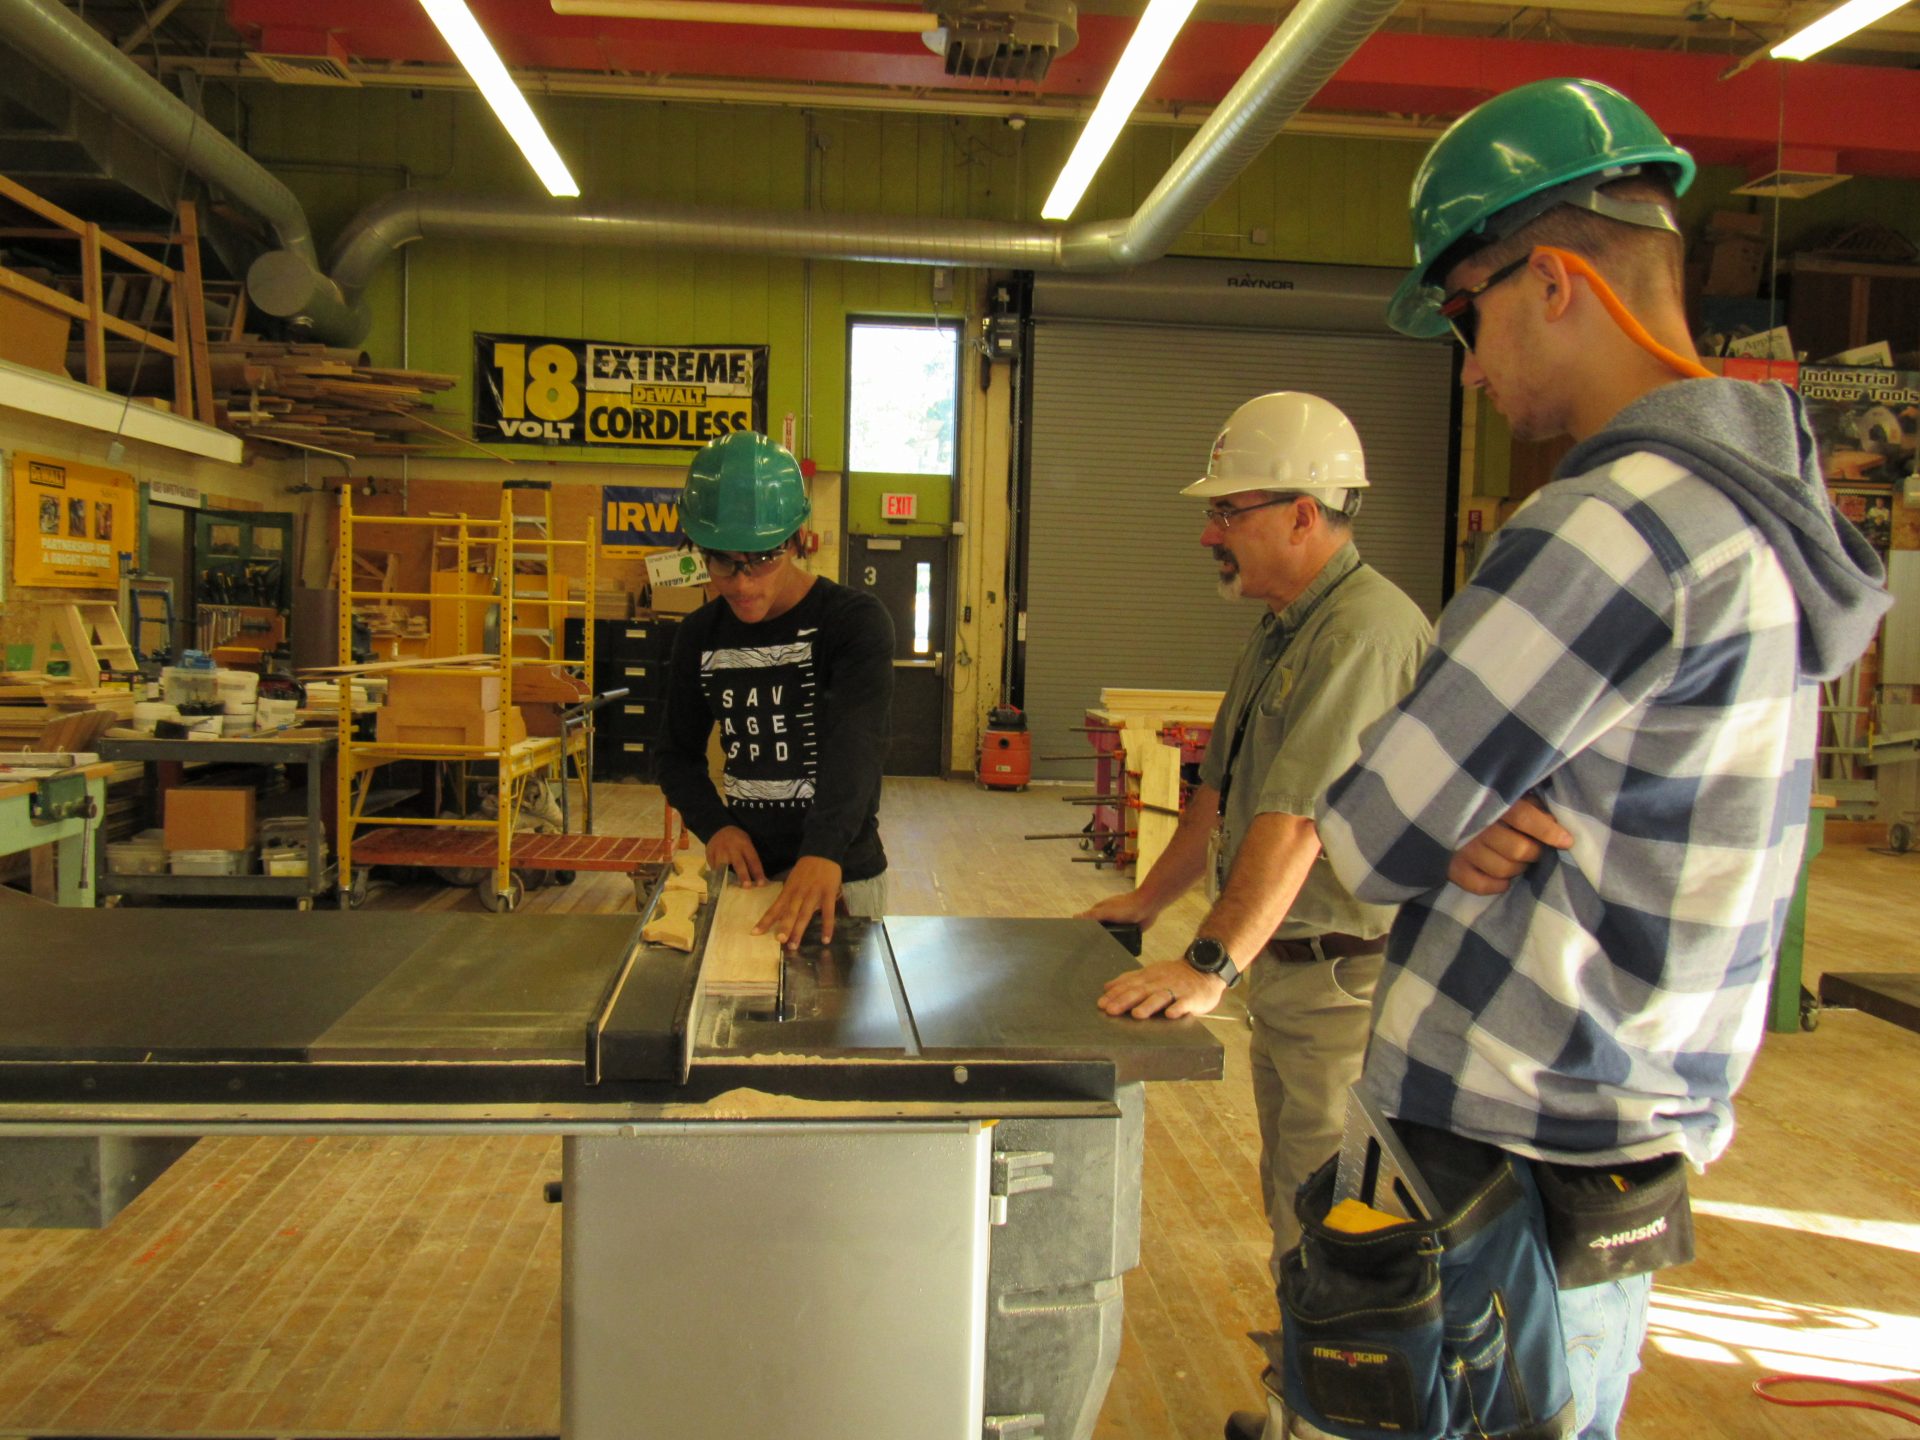 Students sawing wood